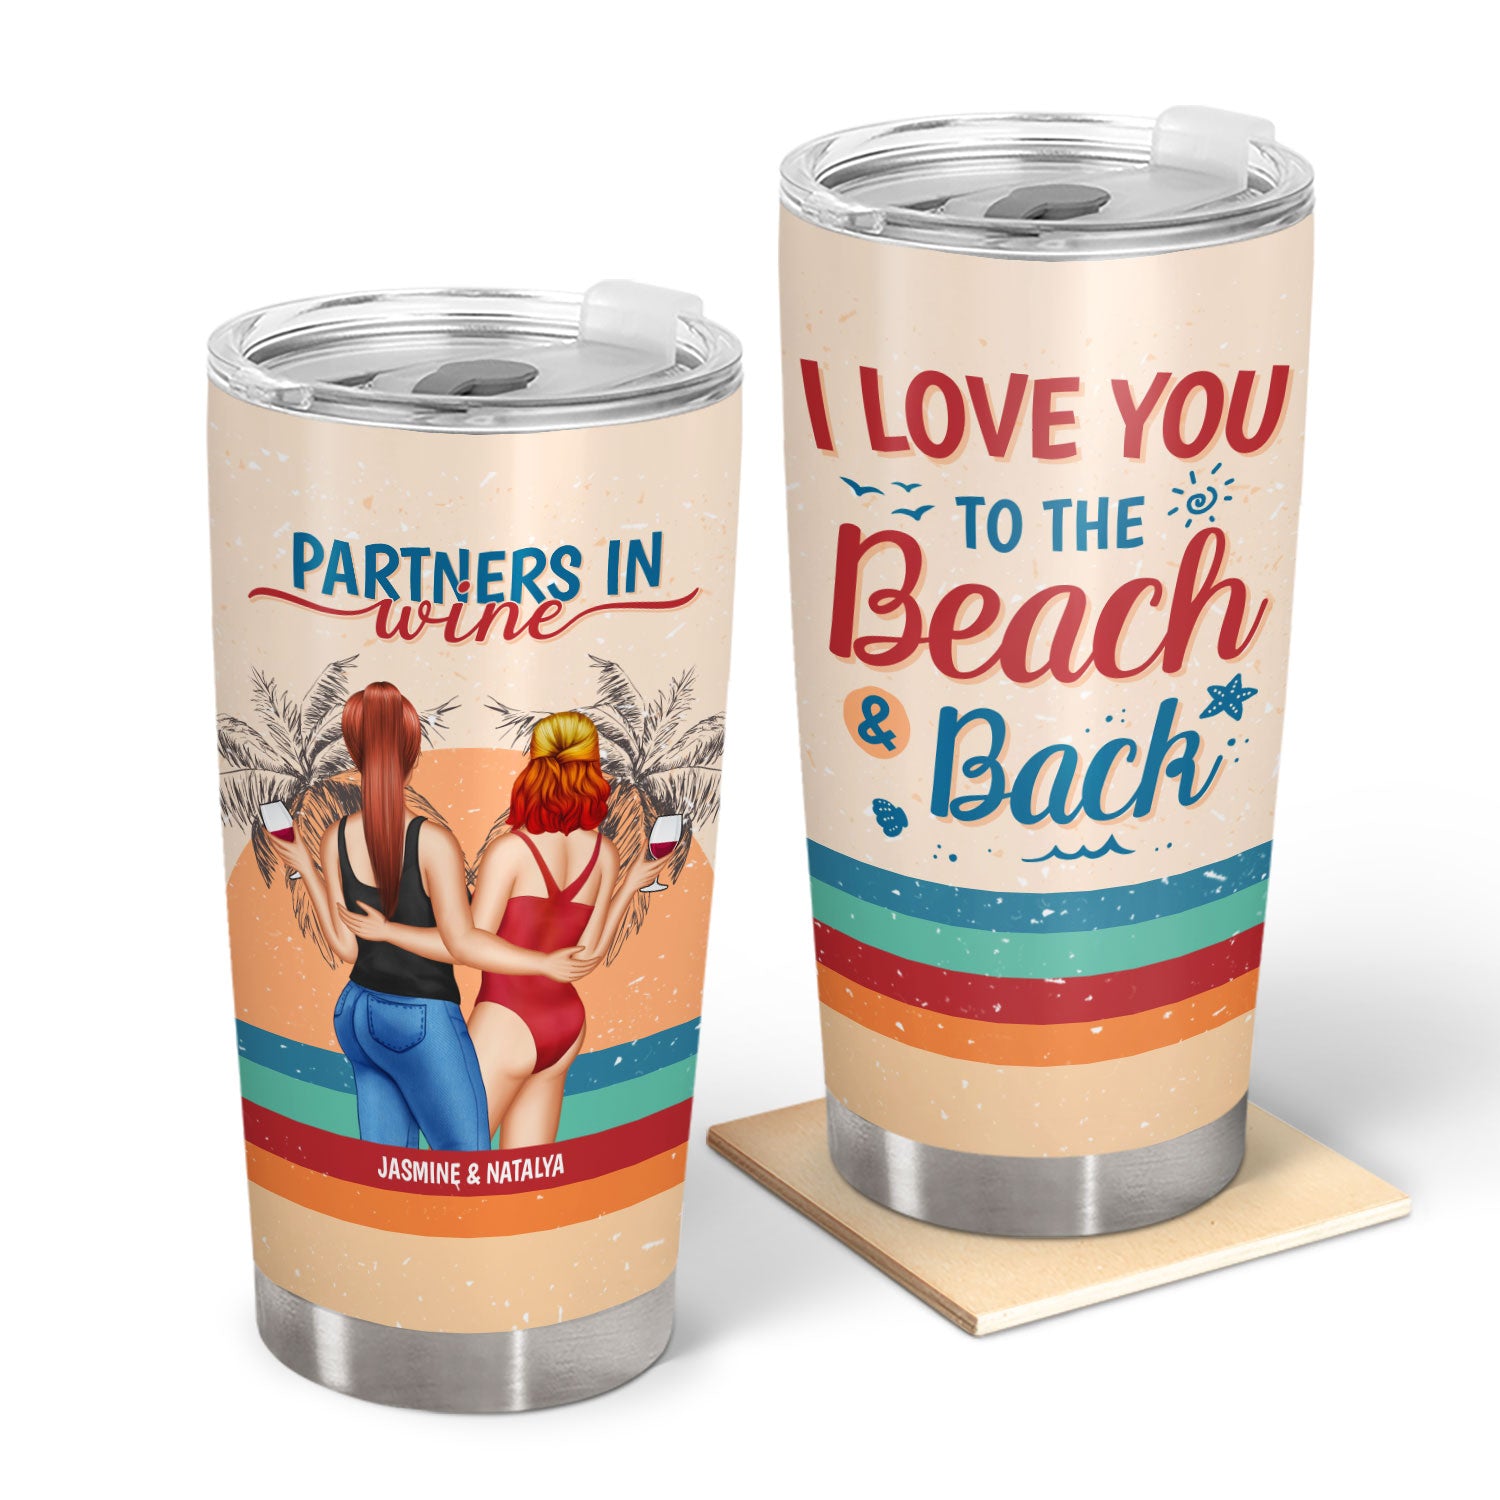 Bestie Partners In Wine I Love You To The Beach & Back - Gift For Bestie - Personalized Custom Tumbler